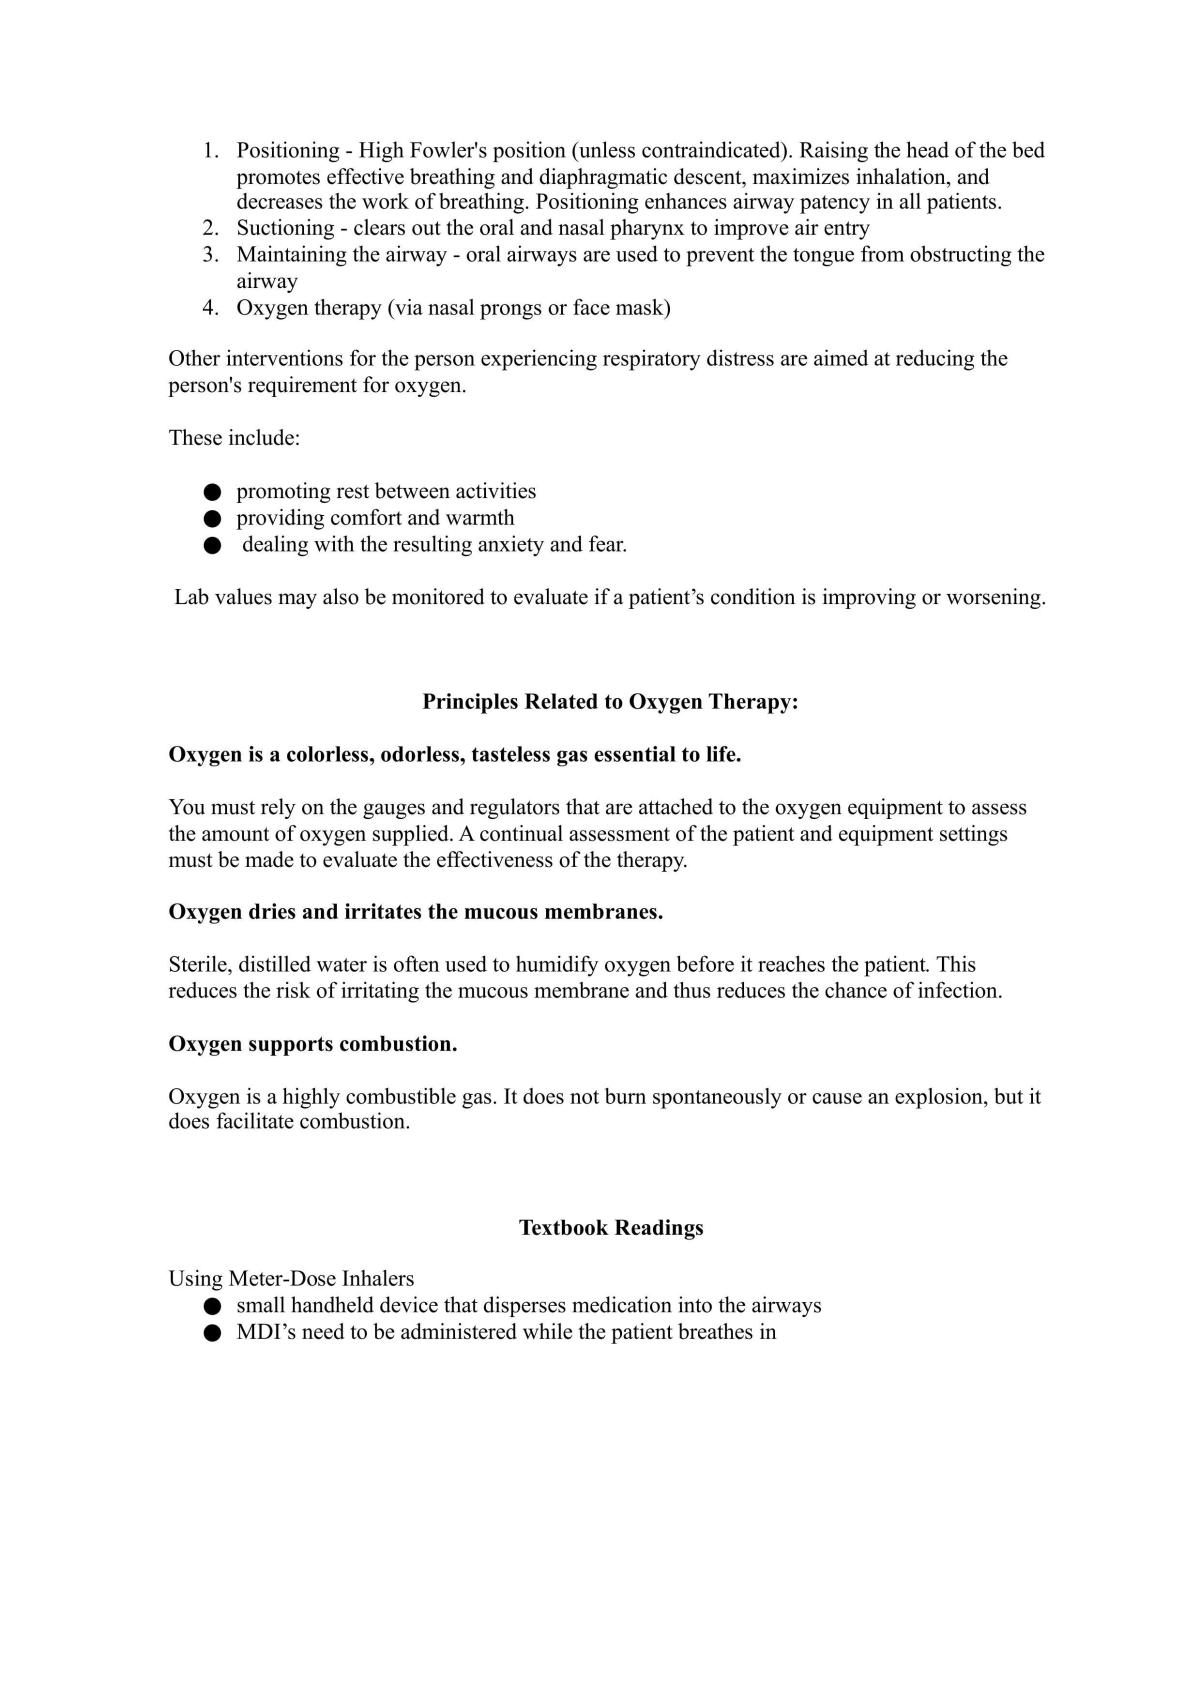 Clinical Techniques 1 Exam Review - Page 11